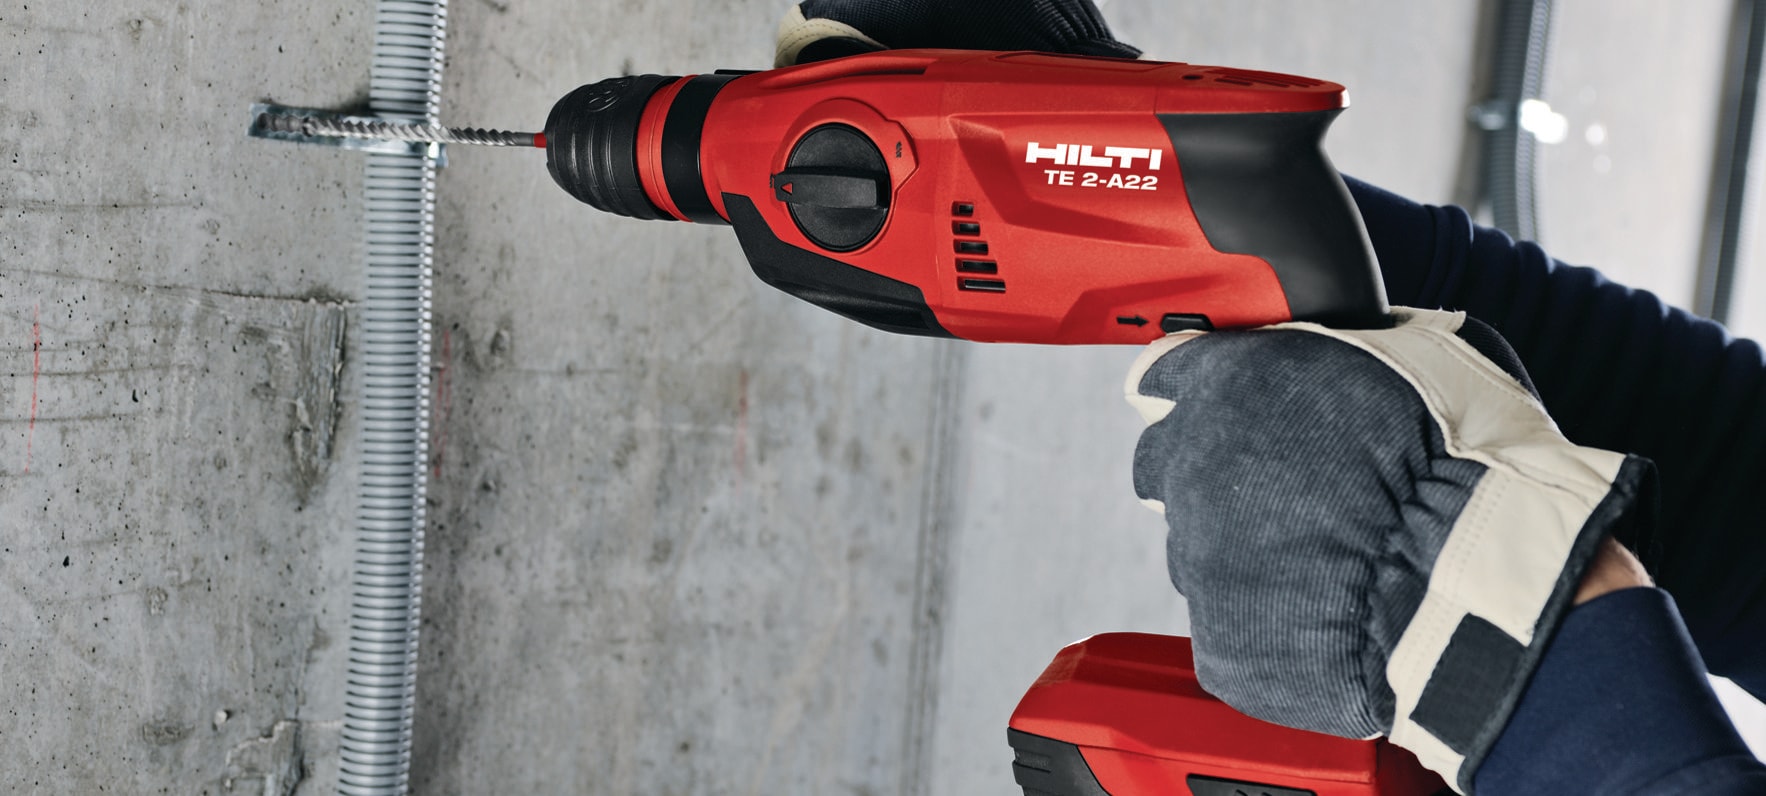 TE 2-A22 Cordless rotary hammer - Cordless SDS Plus Rotary Hammers - Hilti  United Arab Emirates